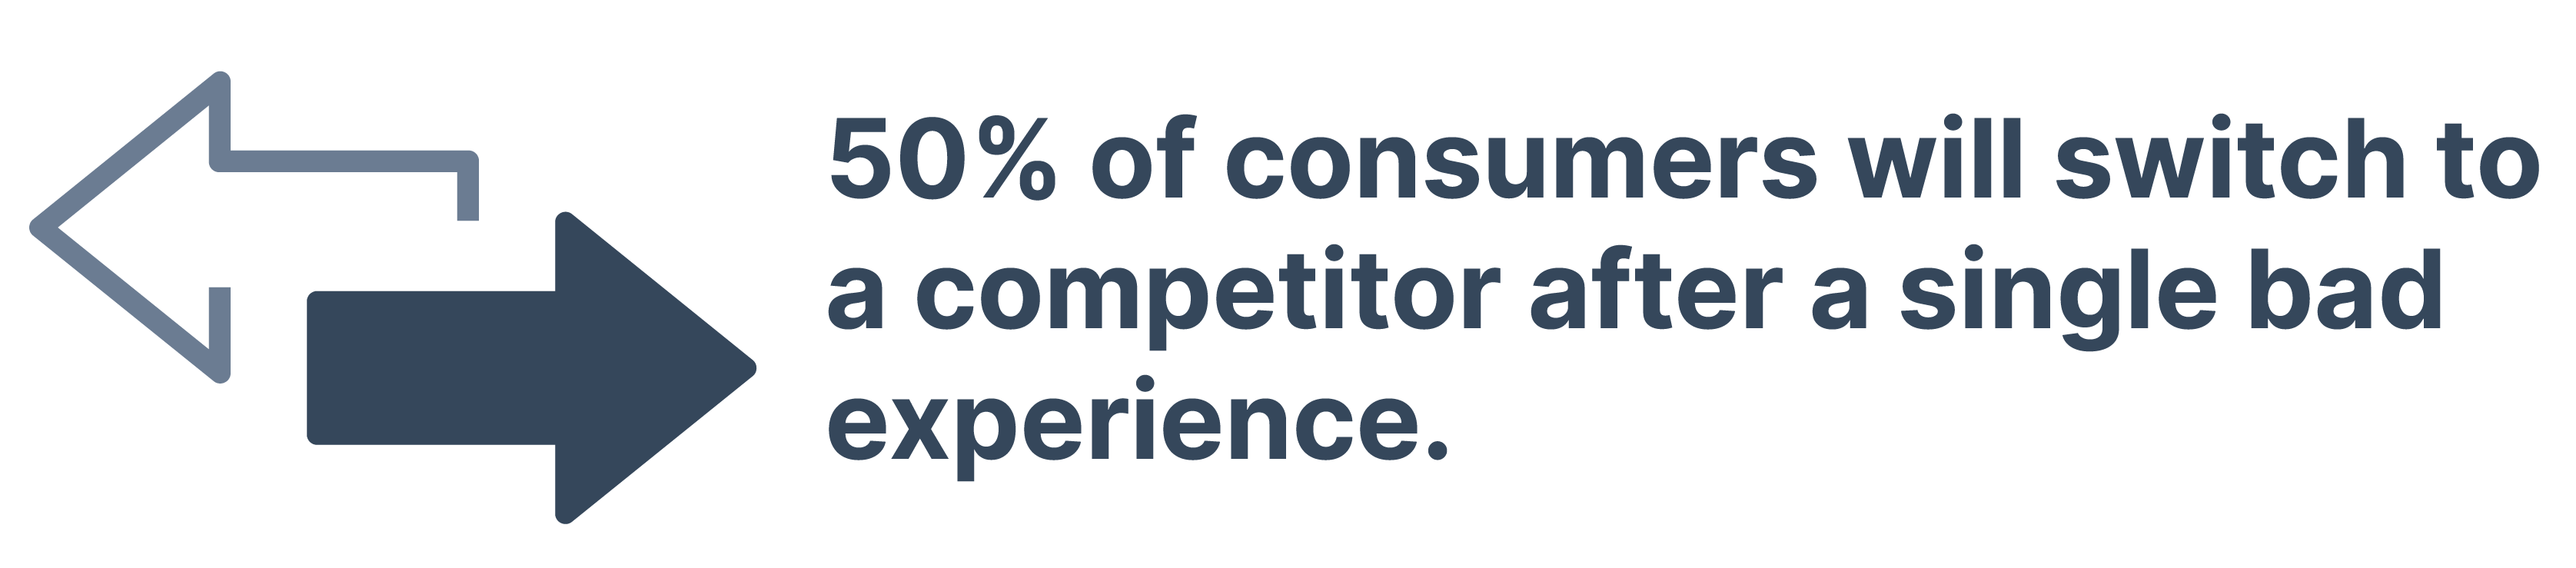 7 ps of the marketing mix 50% of consumers will switch to a competitor after a single bad experience